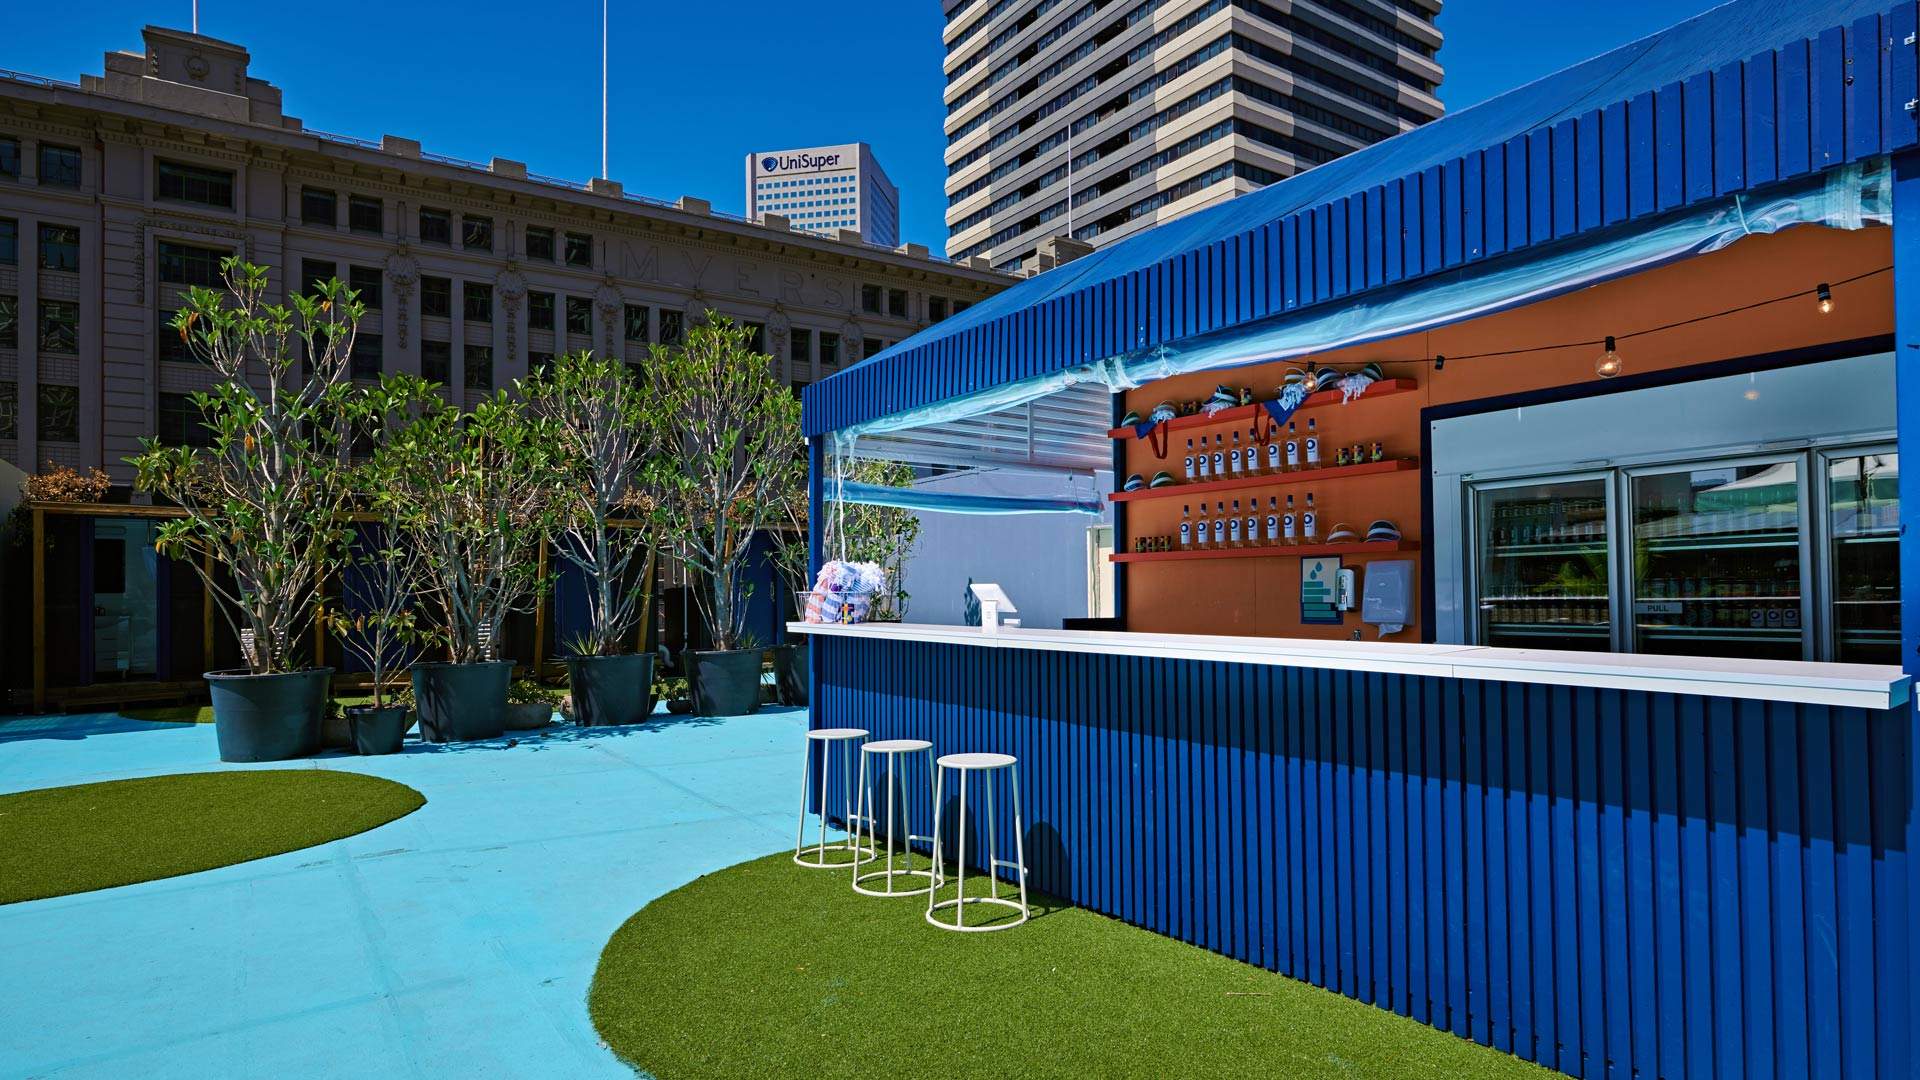 Reunion Island Is Melbourne CBD's New Rooftop Pool Club and Bar